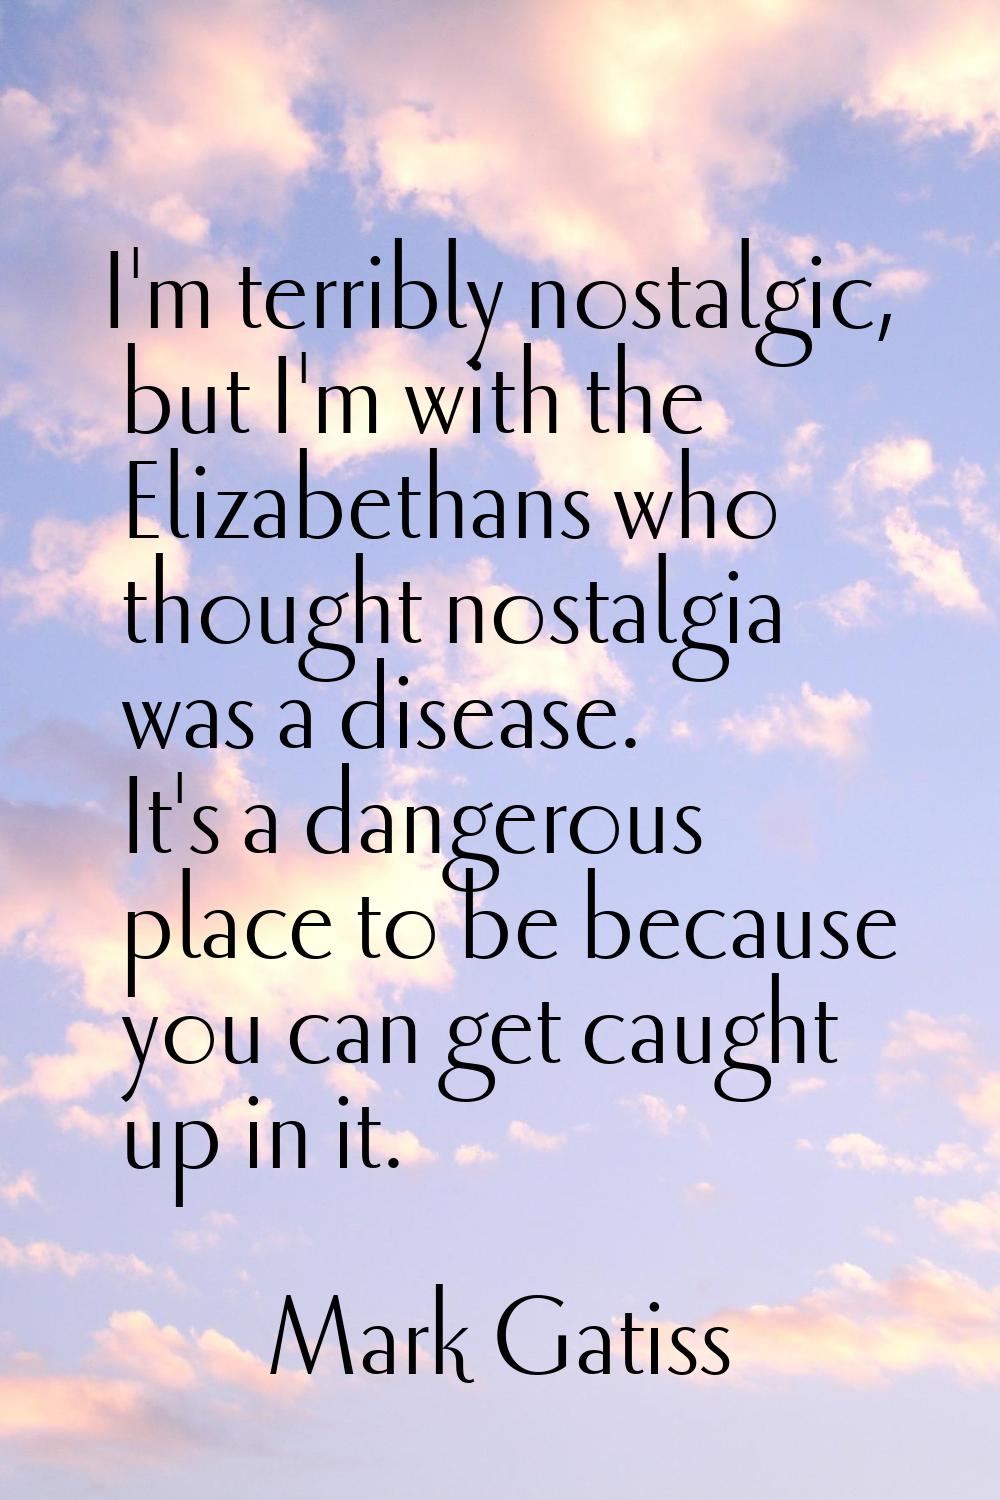 I'm terribly nostalgic, but I'm with the Elizabethans who thought nostalgia was a disease. It's a d